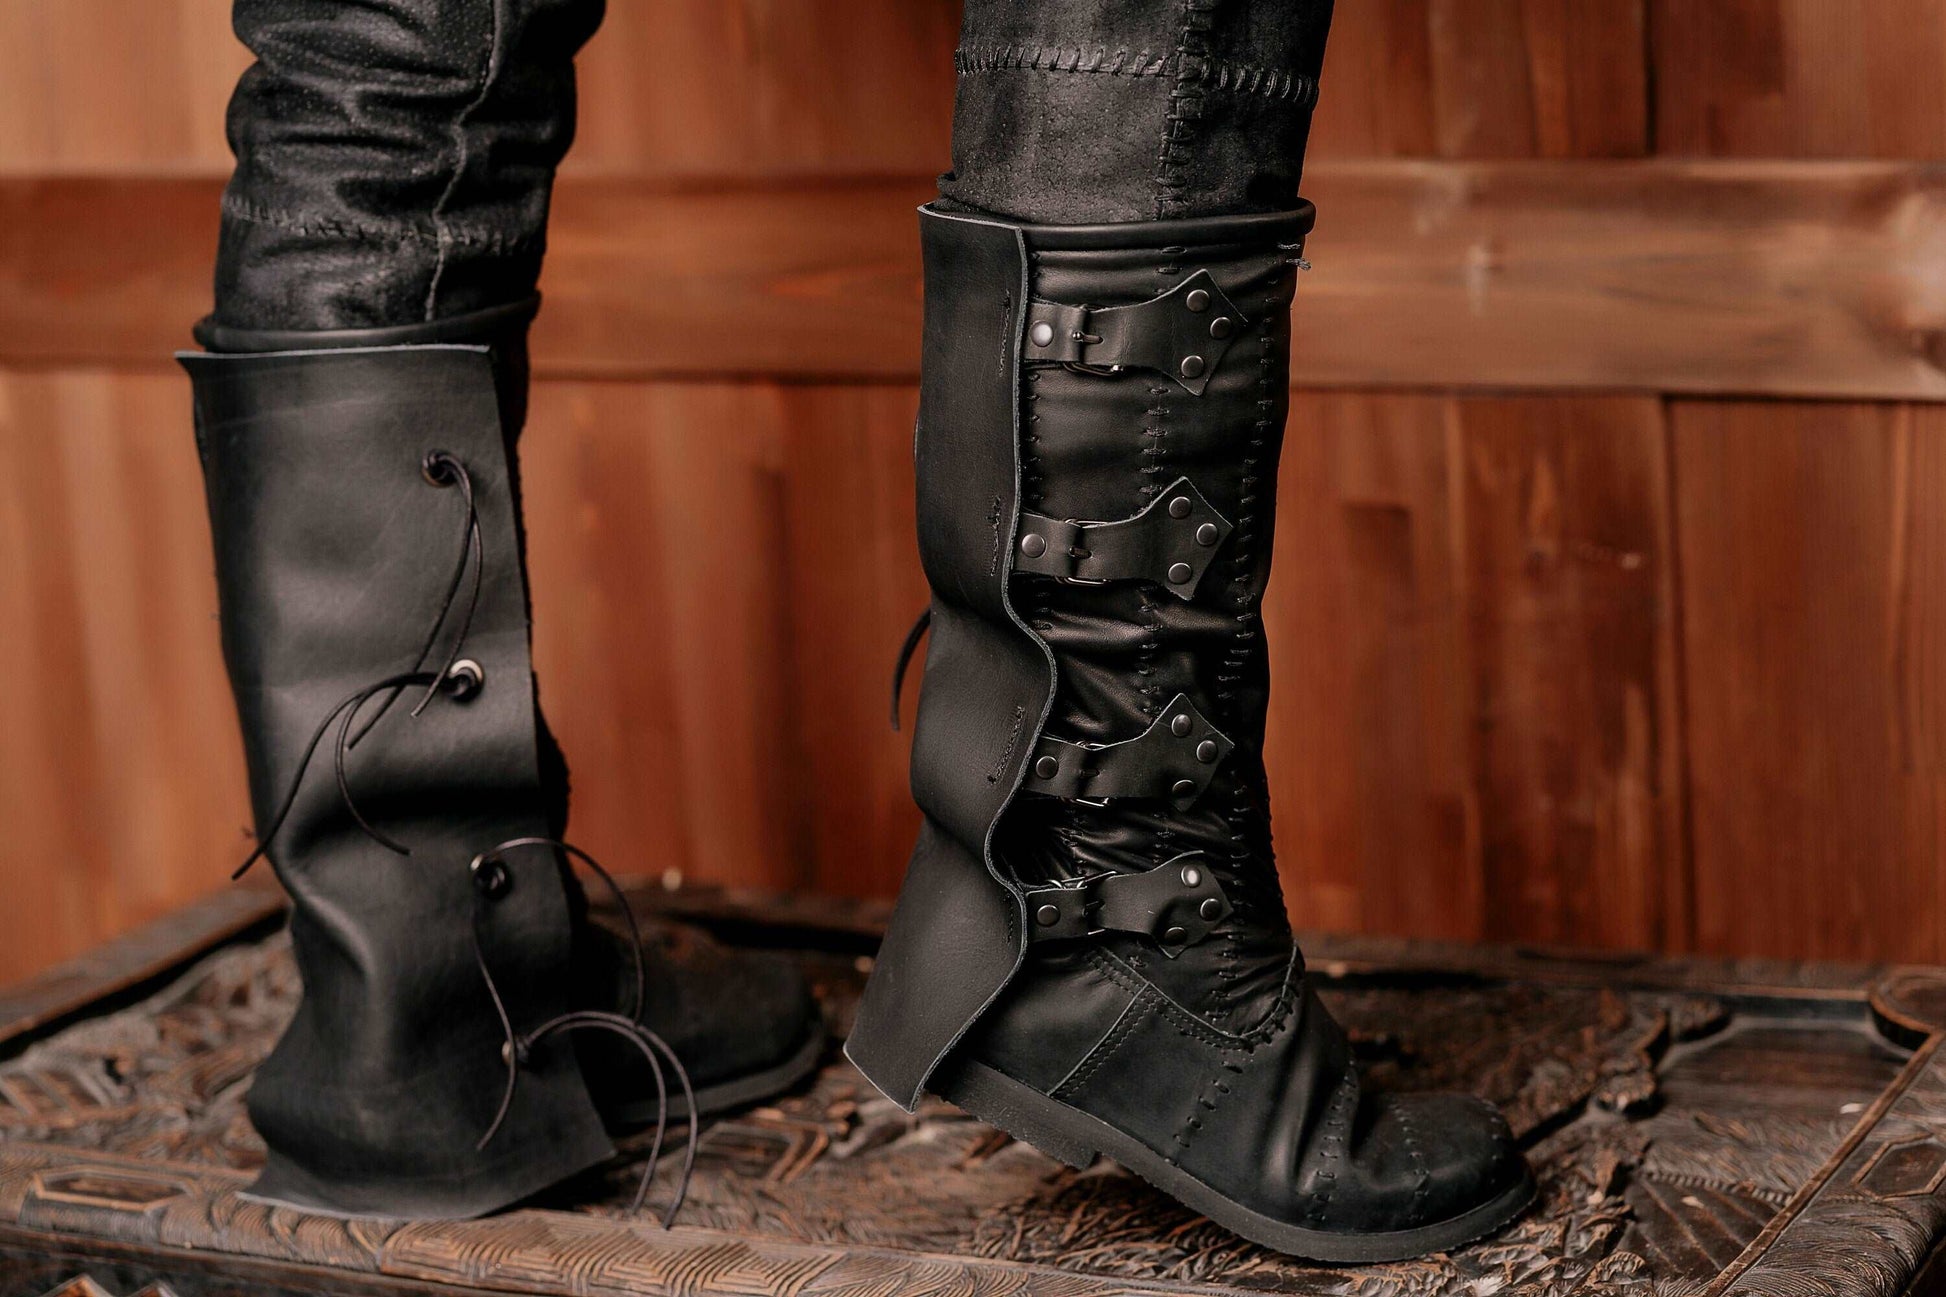 Black leather high boots with buckles